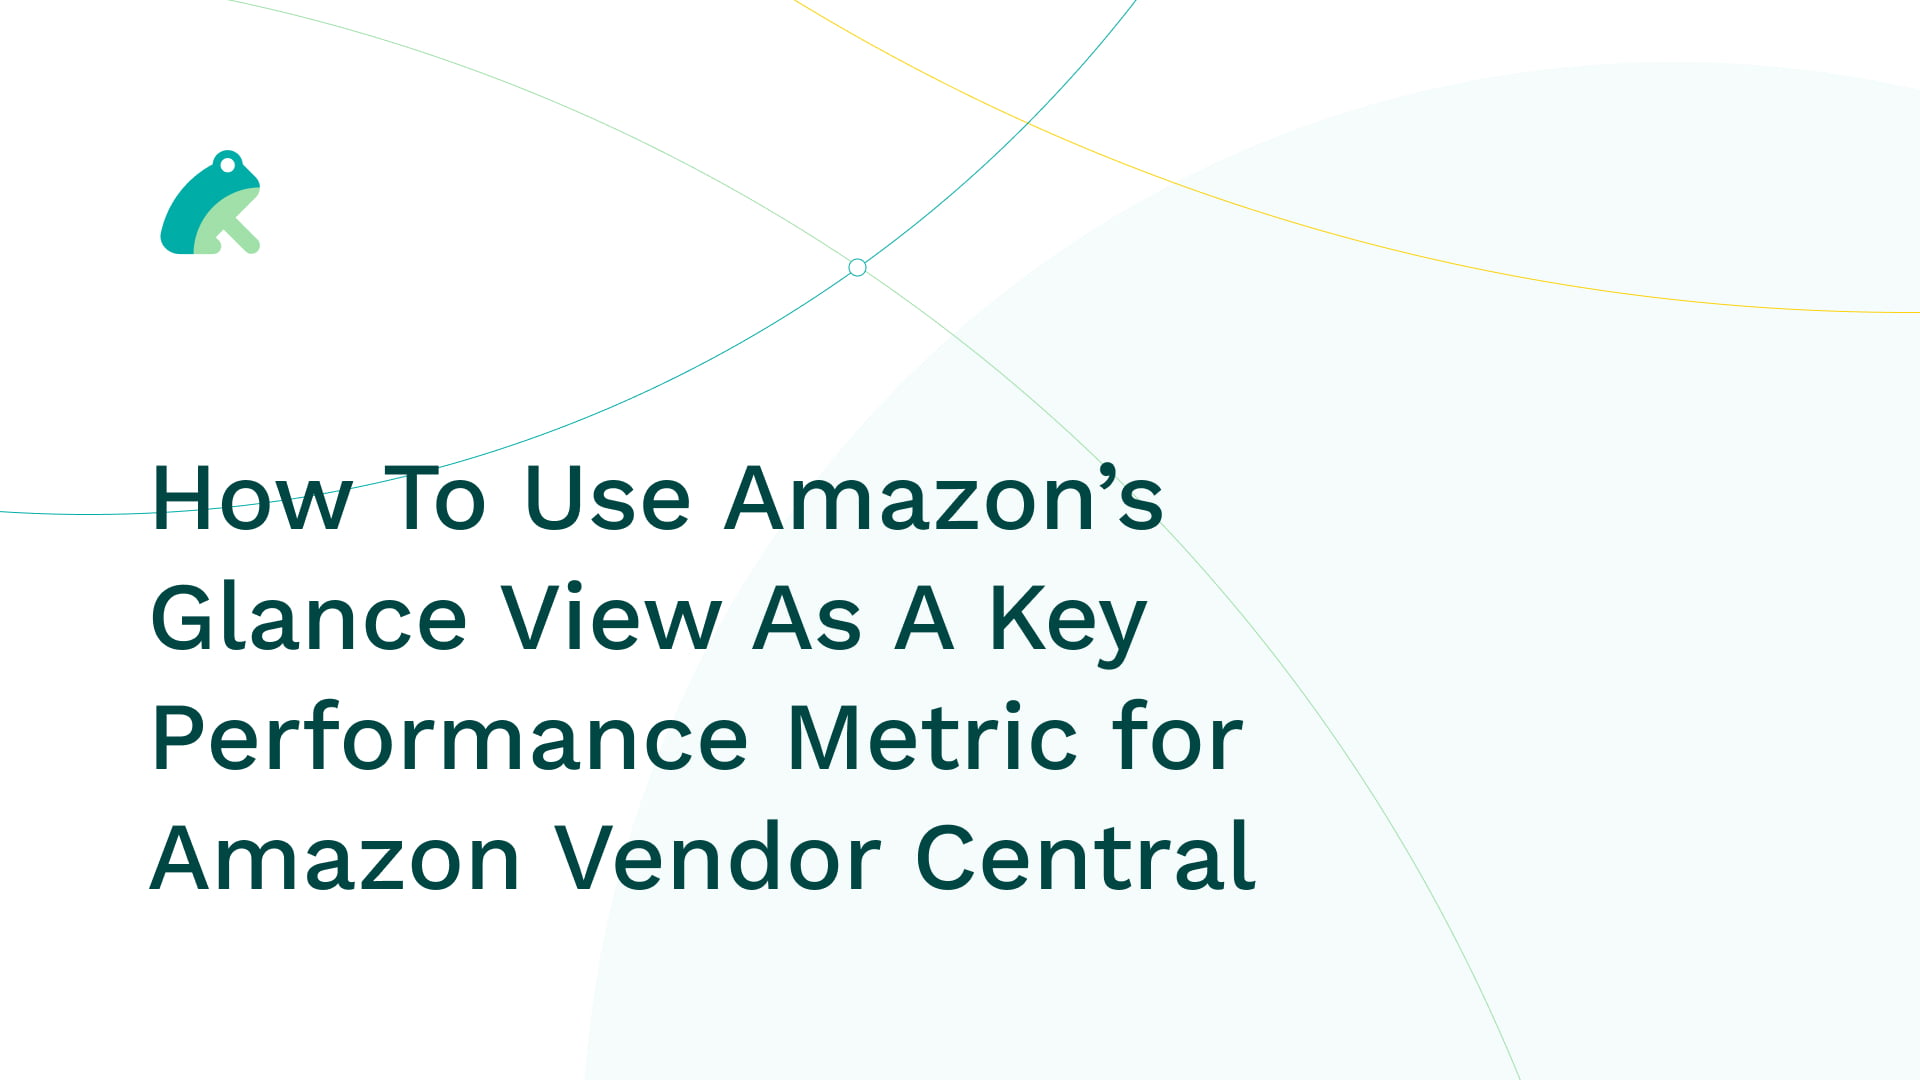 How To Use Amazon’s Glance View As A Key Performance Metric for Amazon Vendor Central